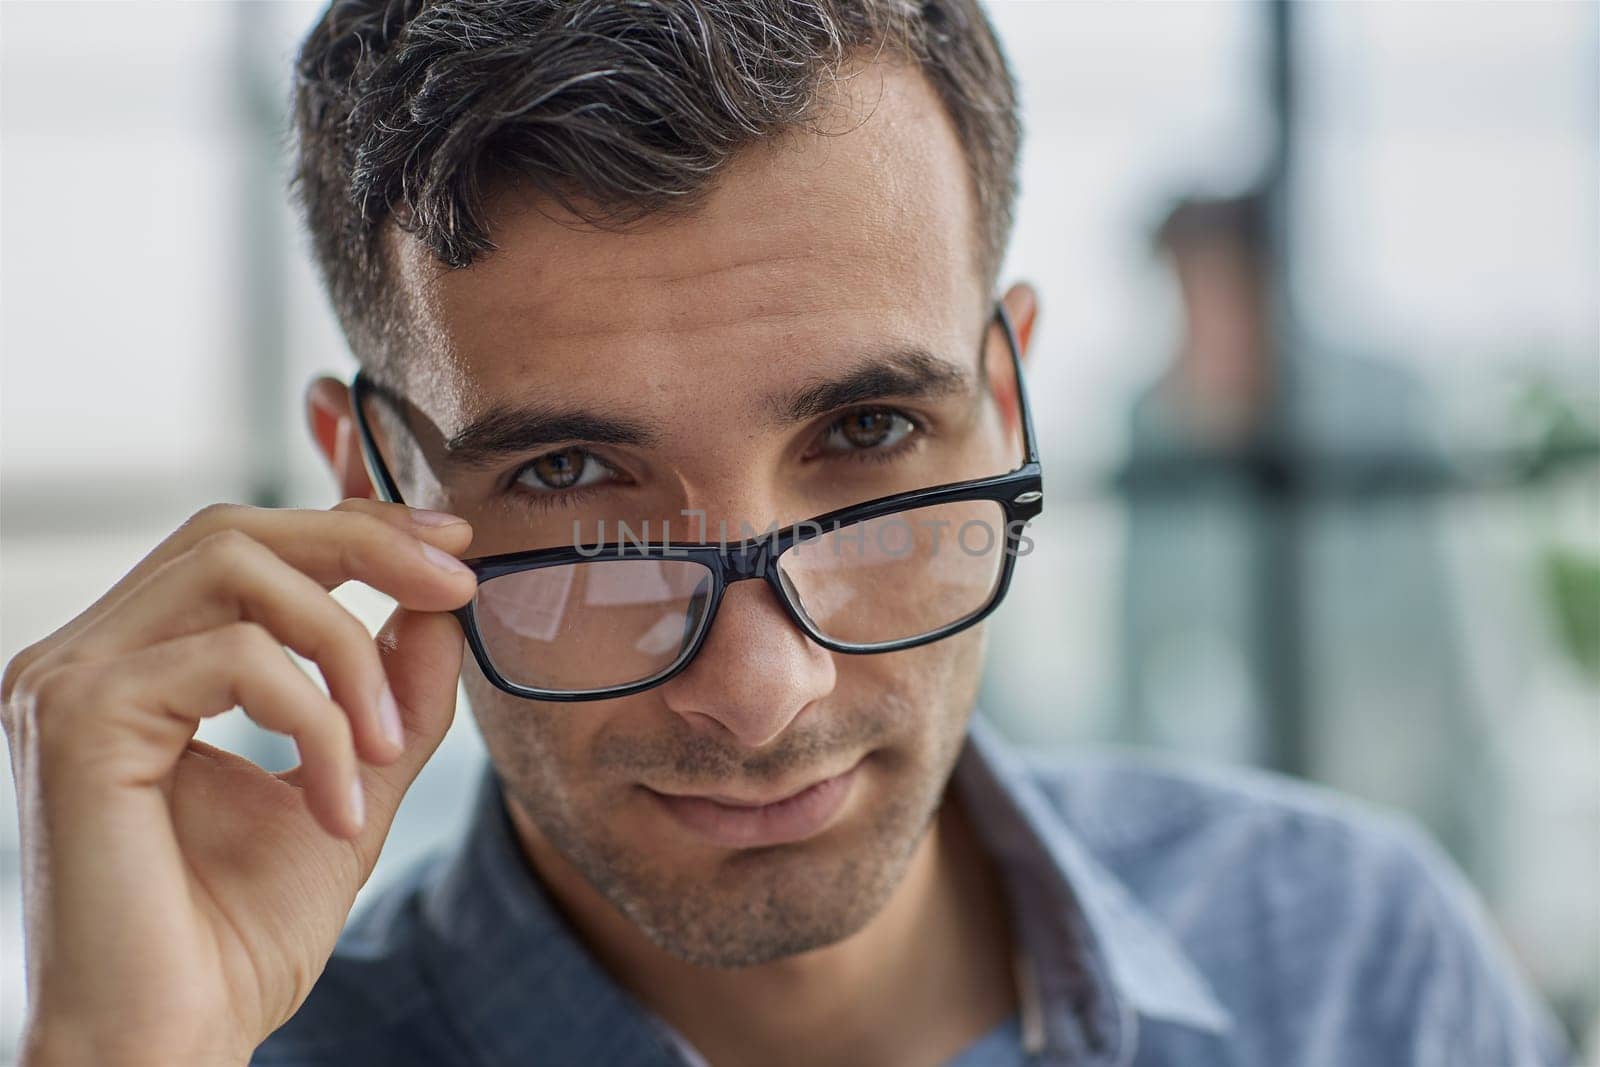 IT guy adjusting glasses in a modern new office